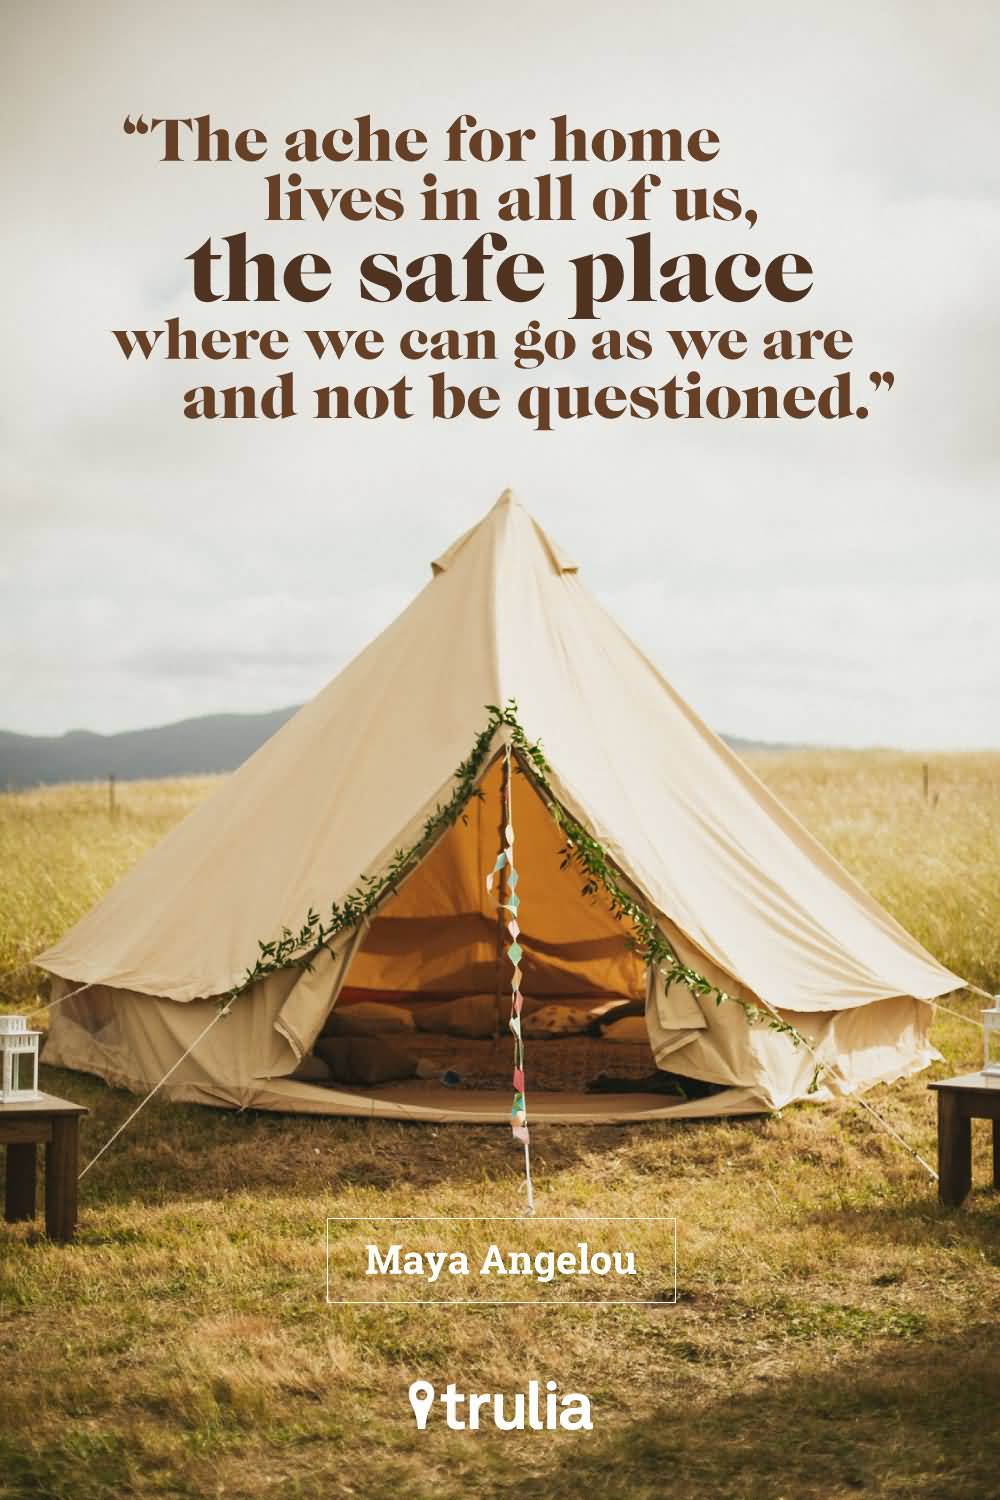 The ache for home lives in all of us, the safe place where we can go as we are and not be questioned - Maya Angelou